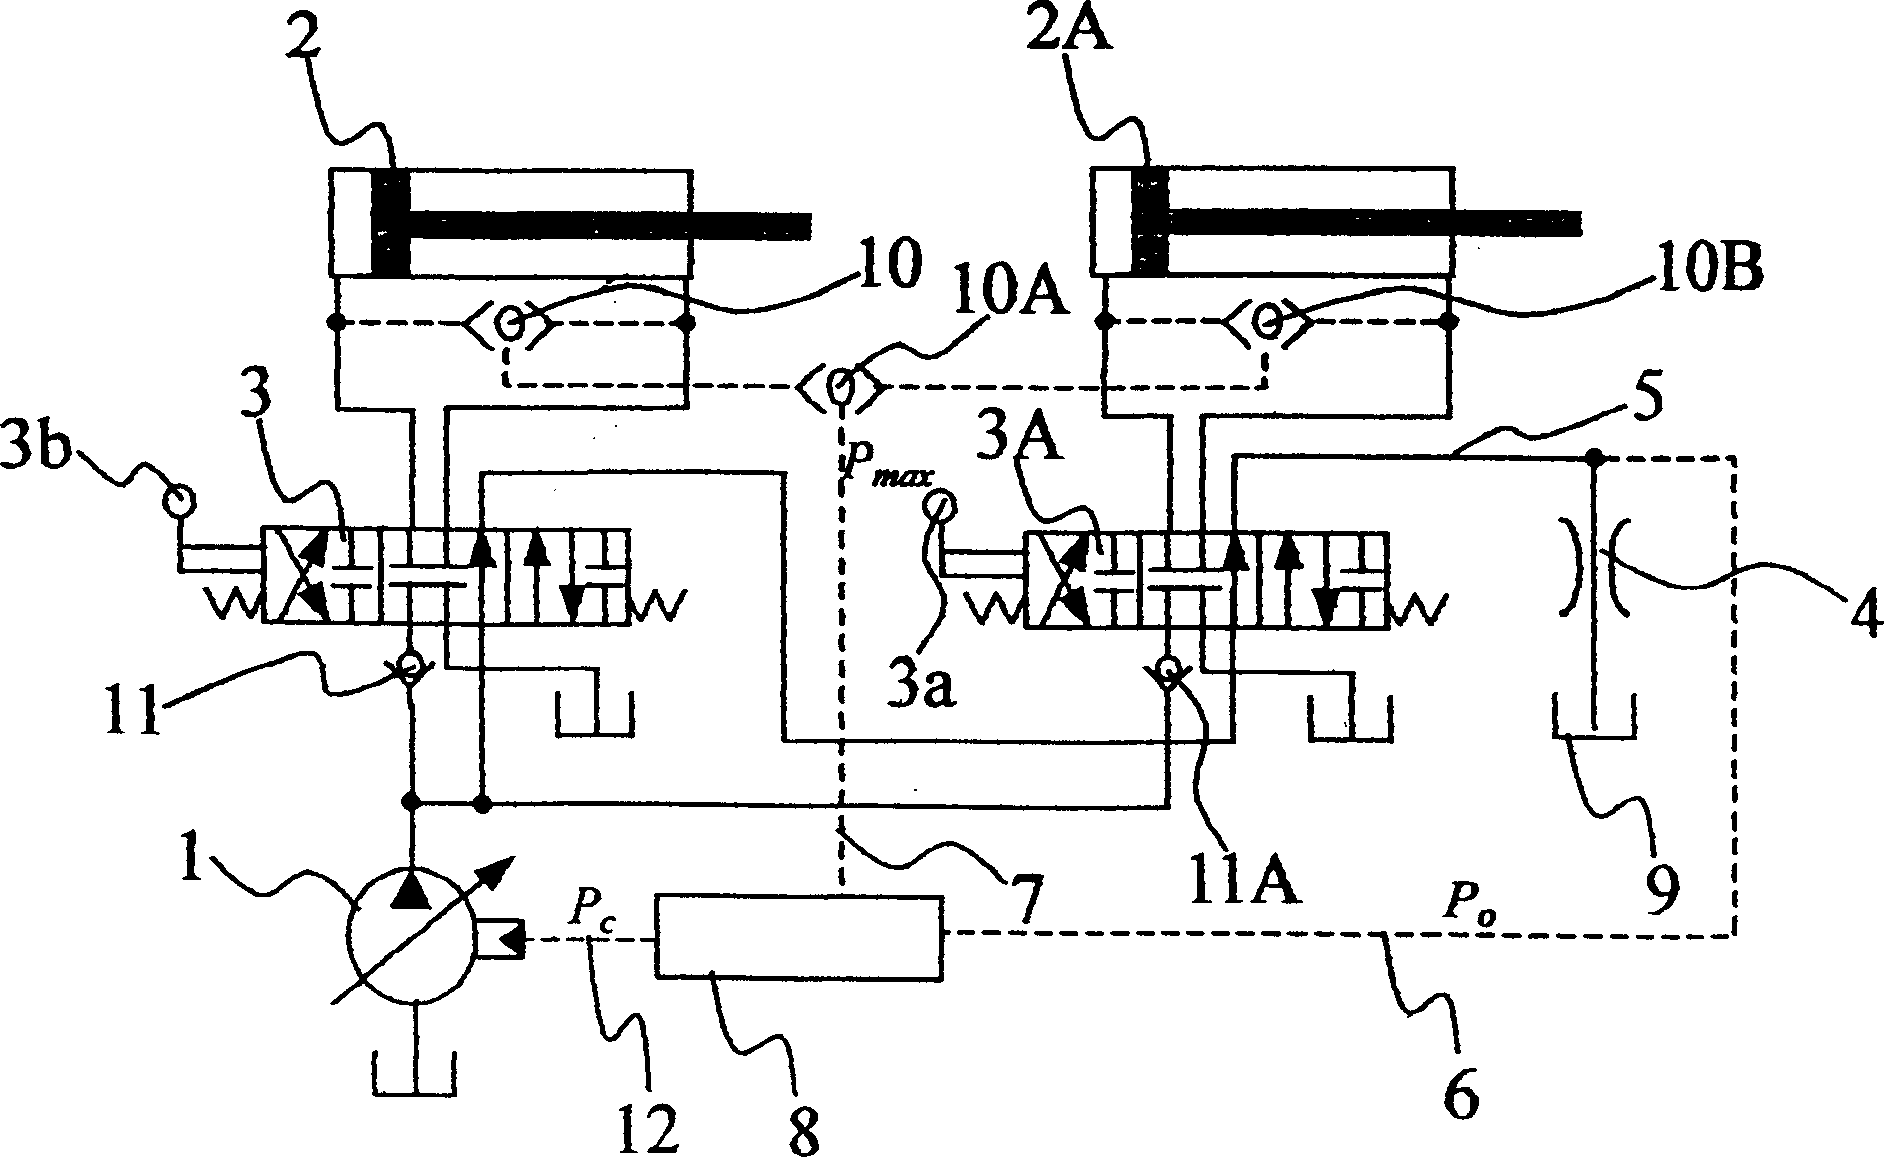 Load sensing hydraulic system for controlling six-way multiple unit valve